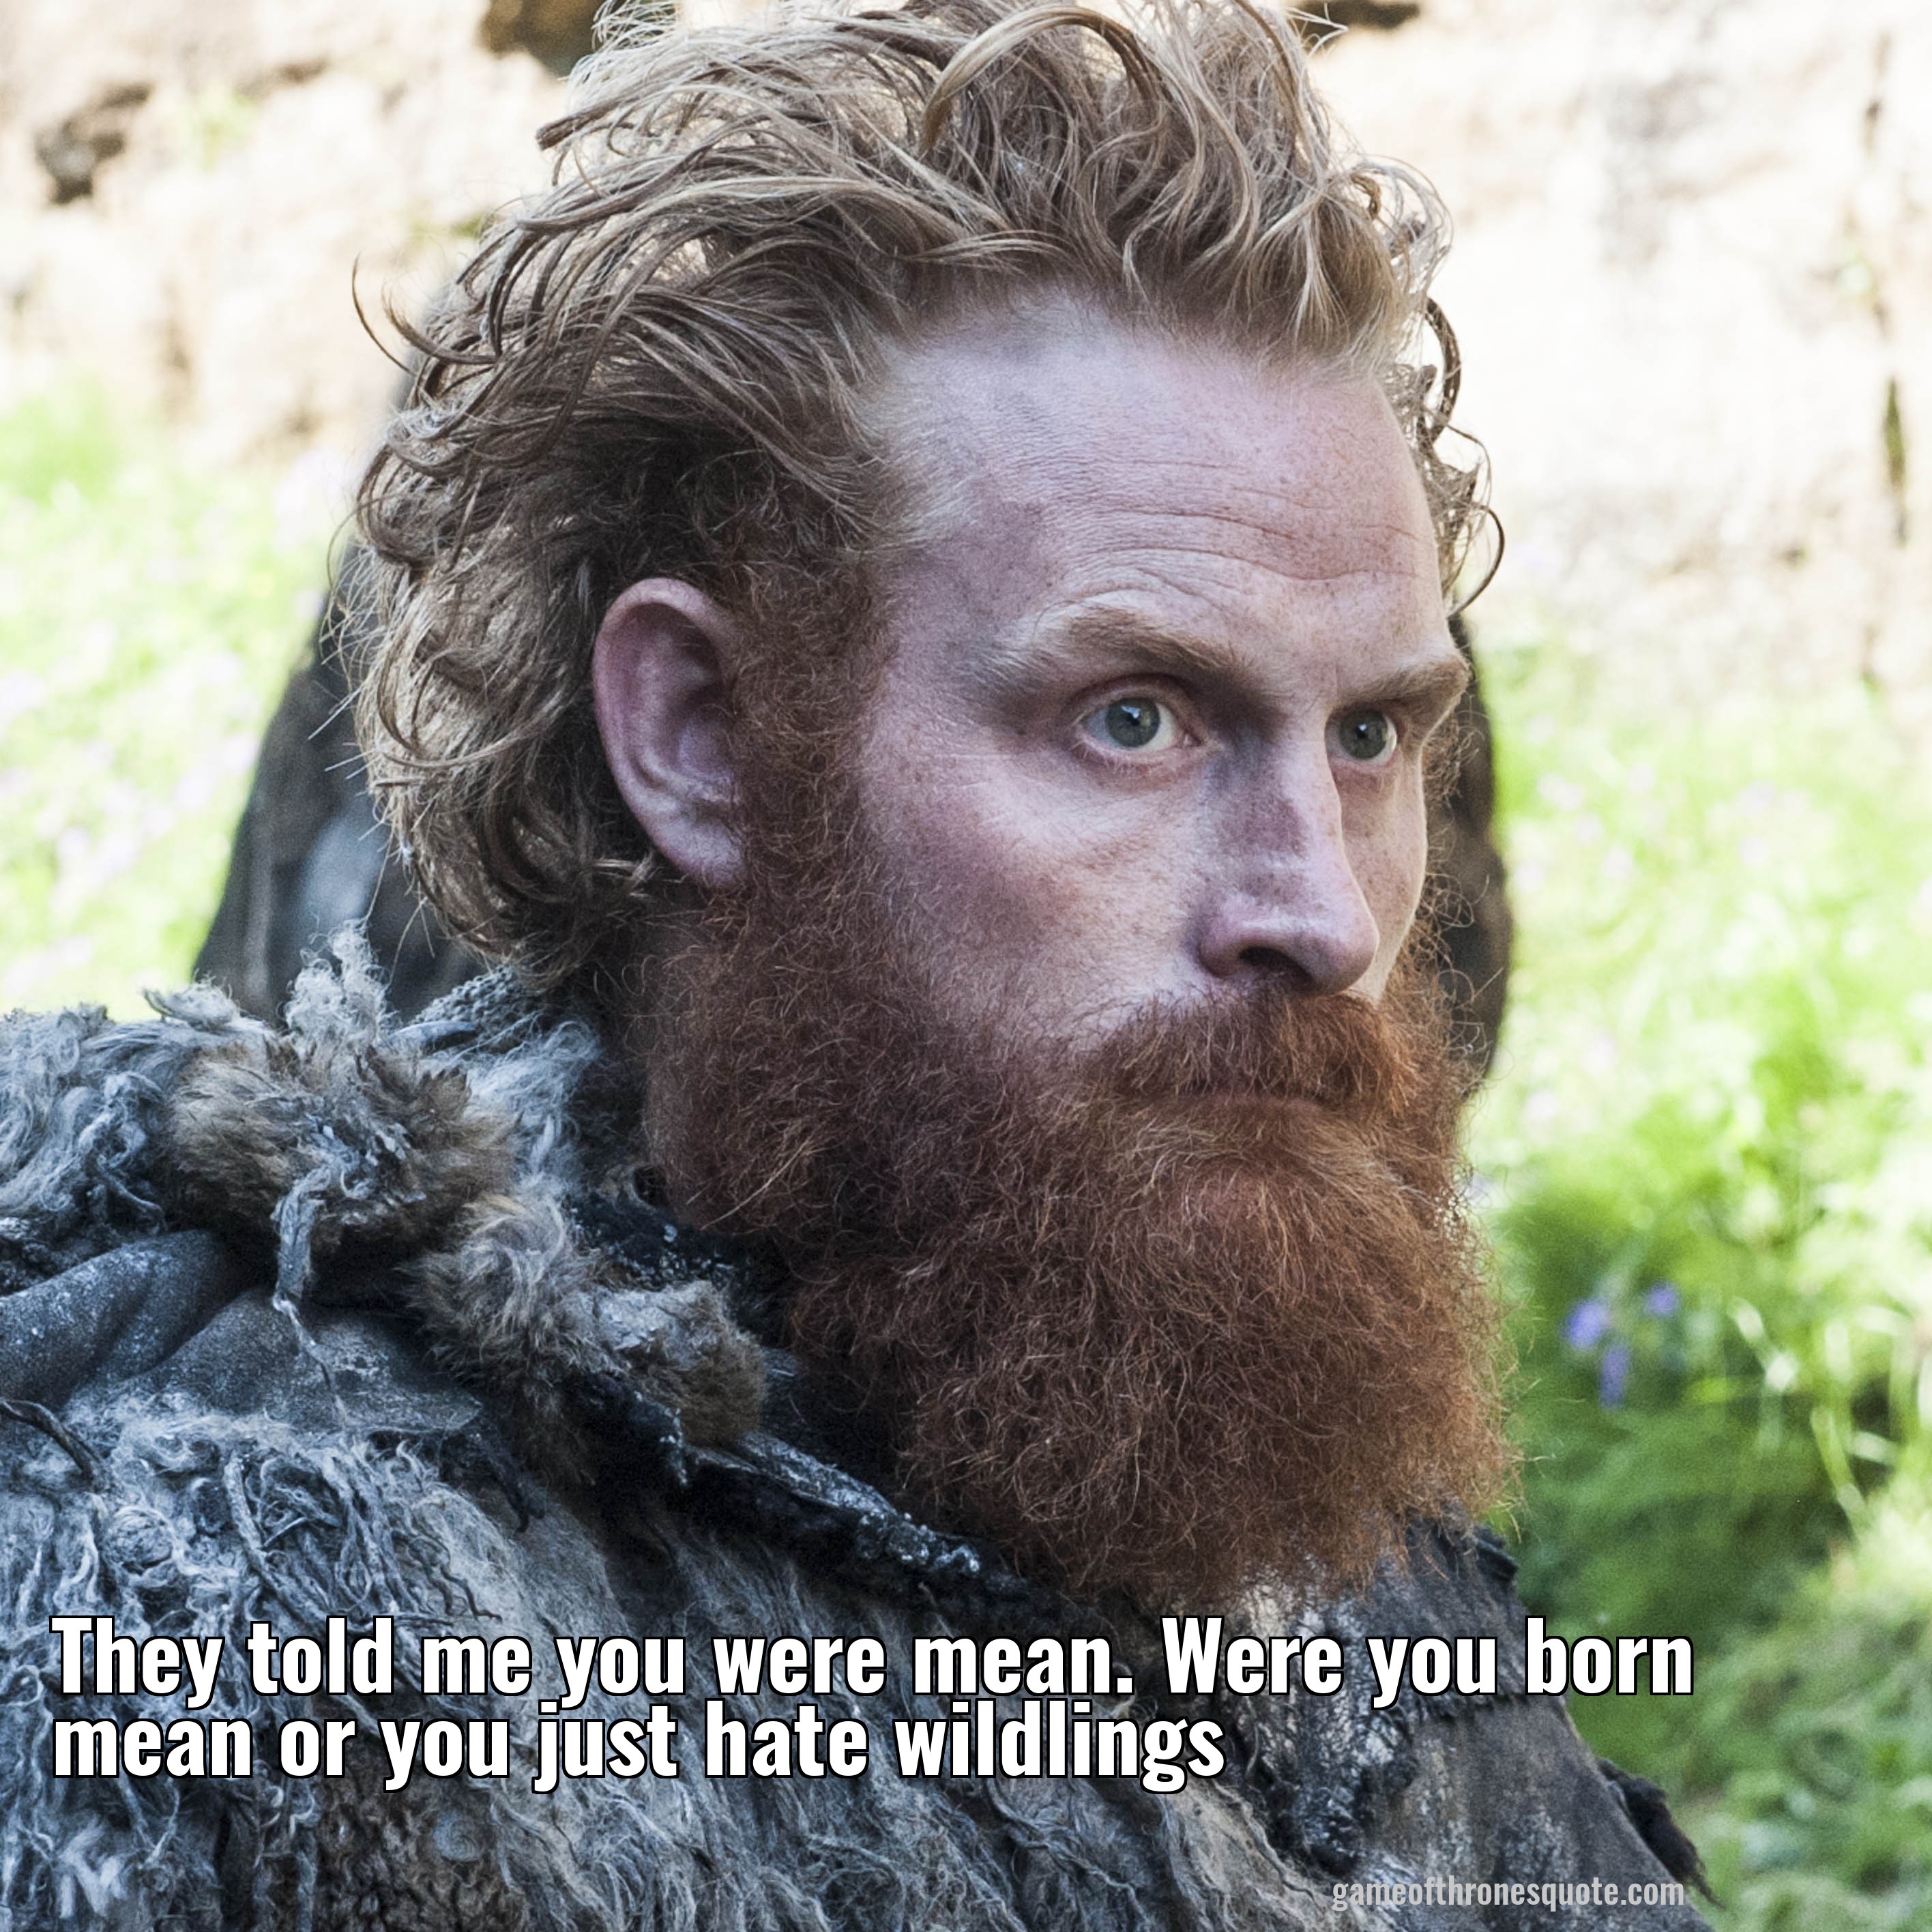 They told me you were mean. Were you born mean or you just hate wildlings